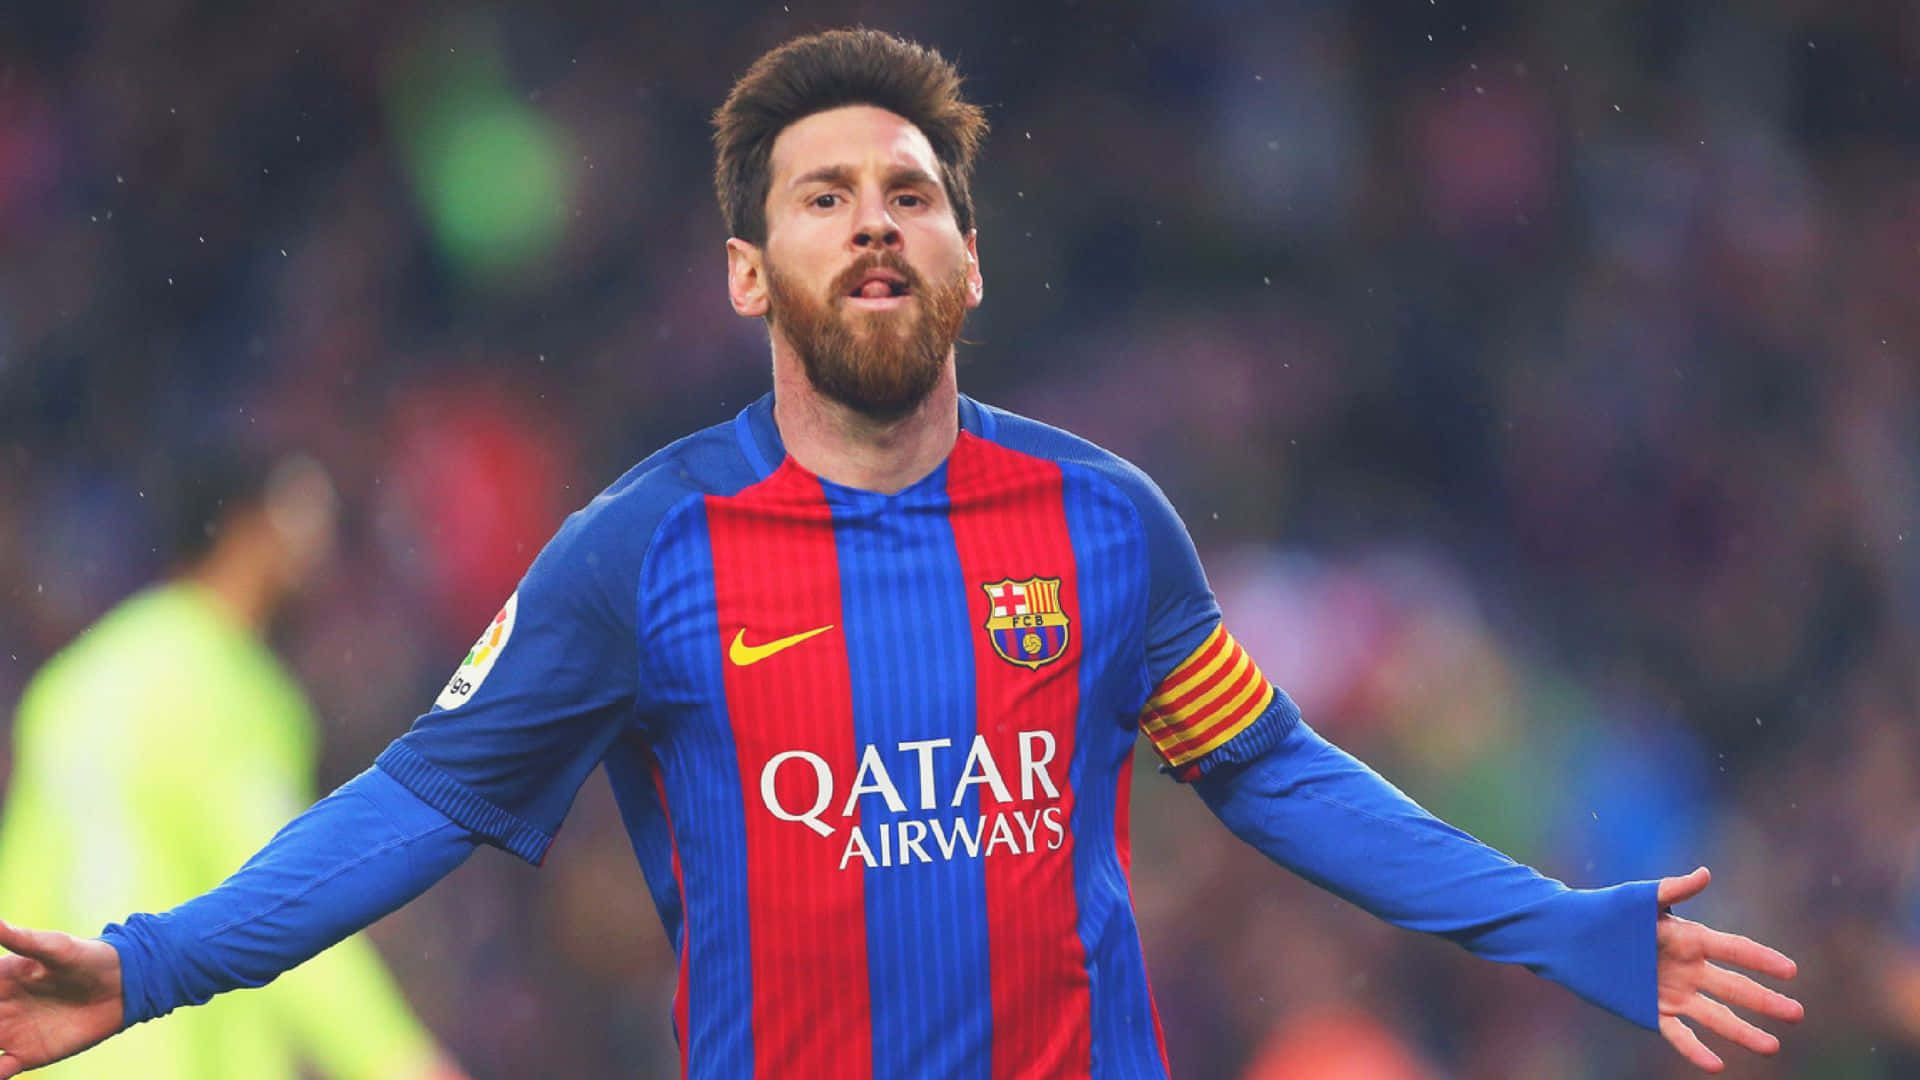 Lionel Messi Celebrates His Goal During A Game